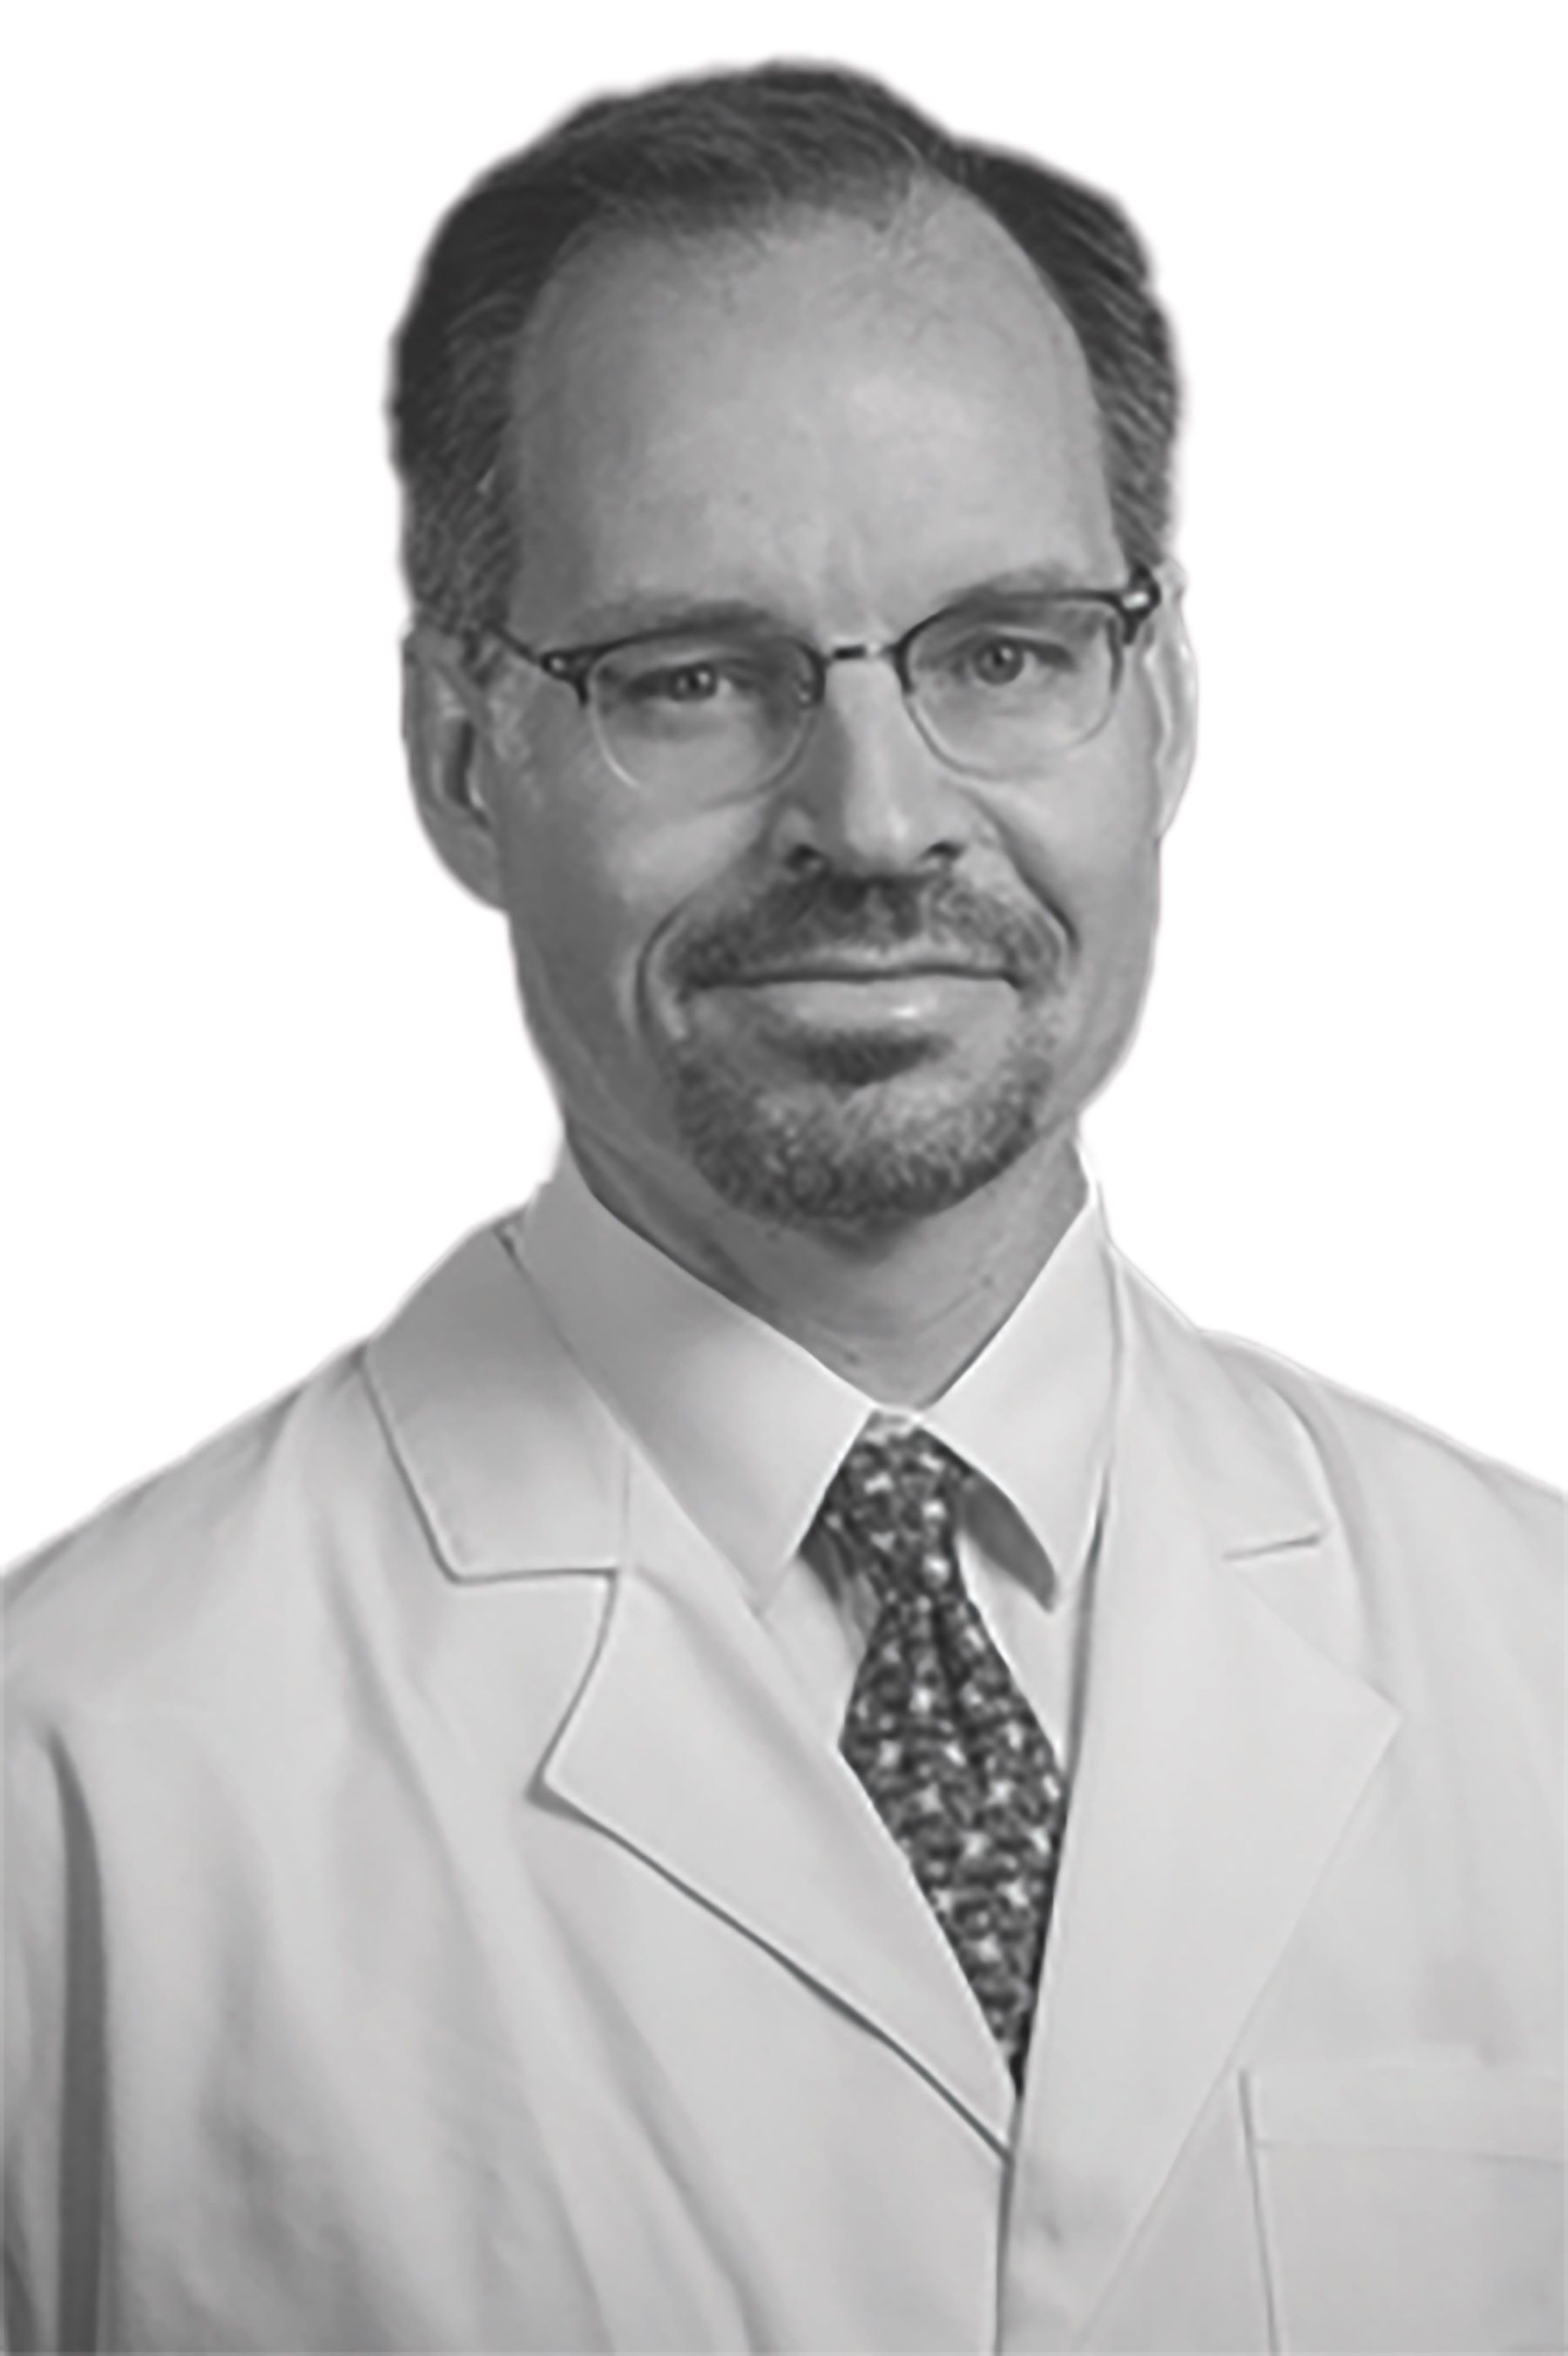 Polascik is a professor of Surgery/Urology and director of Focal Therapy at the Duke Cancer Center, Duke Medical Center in Durham, NC